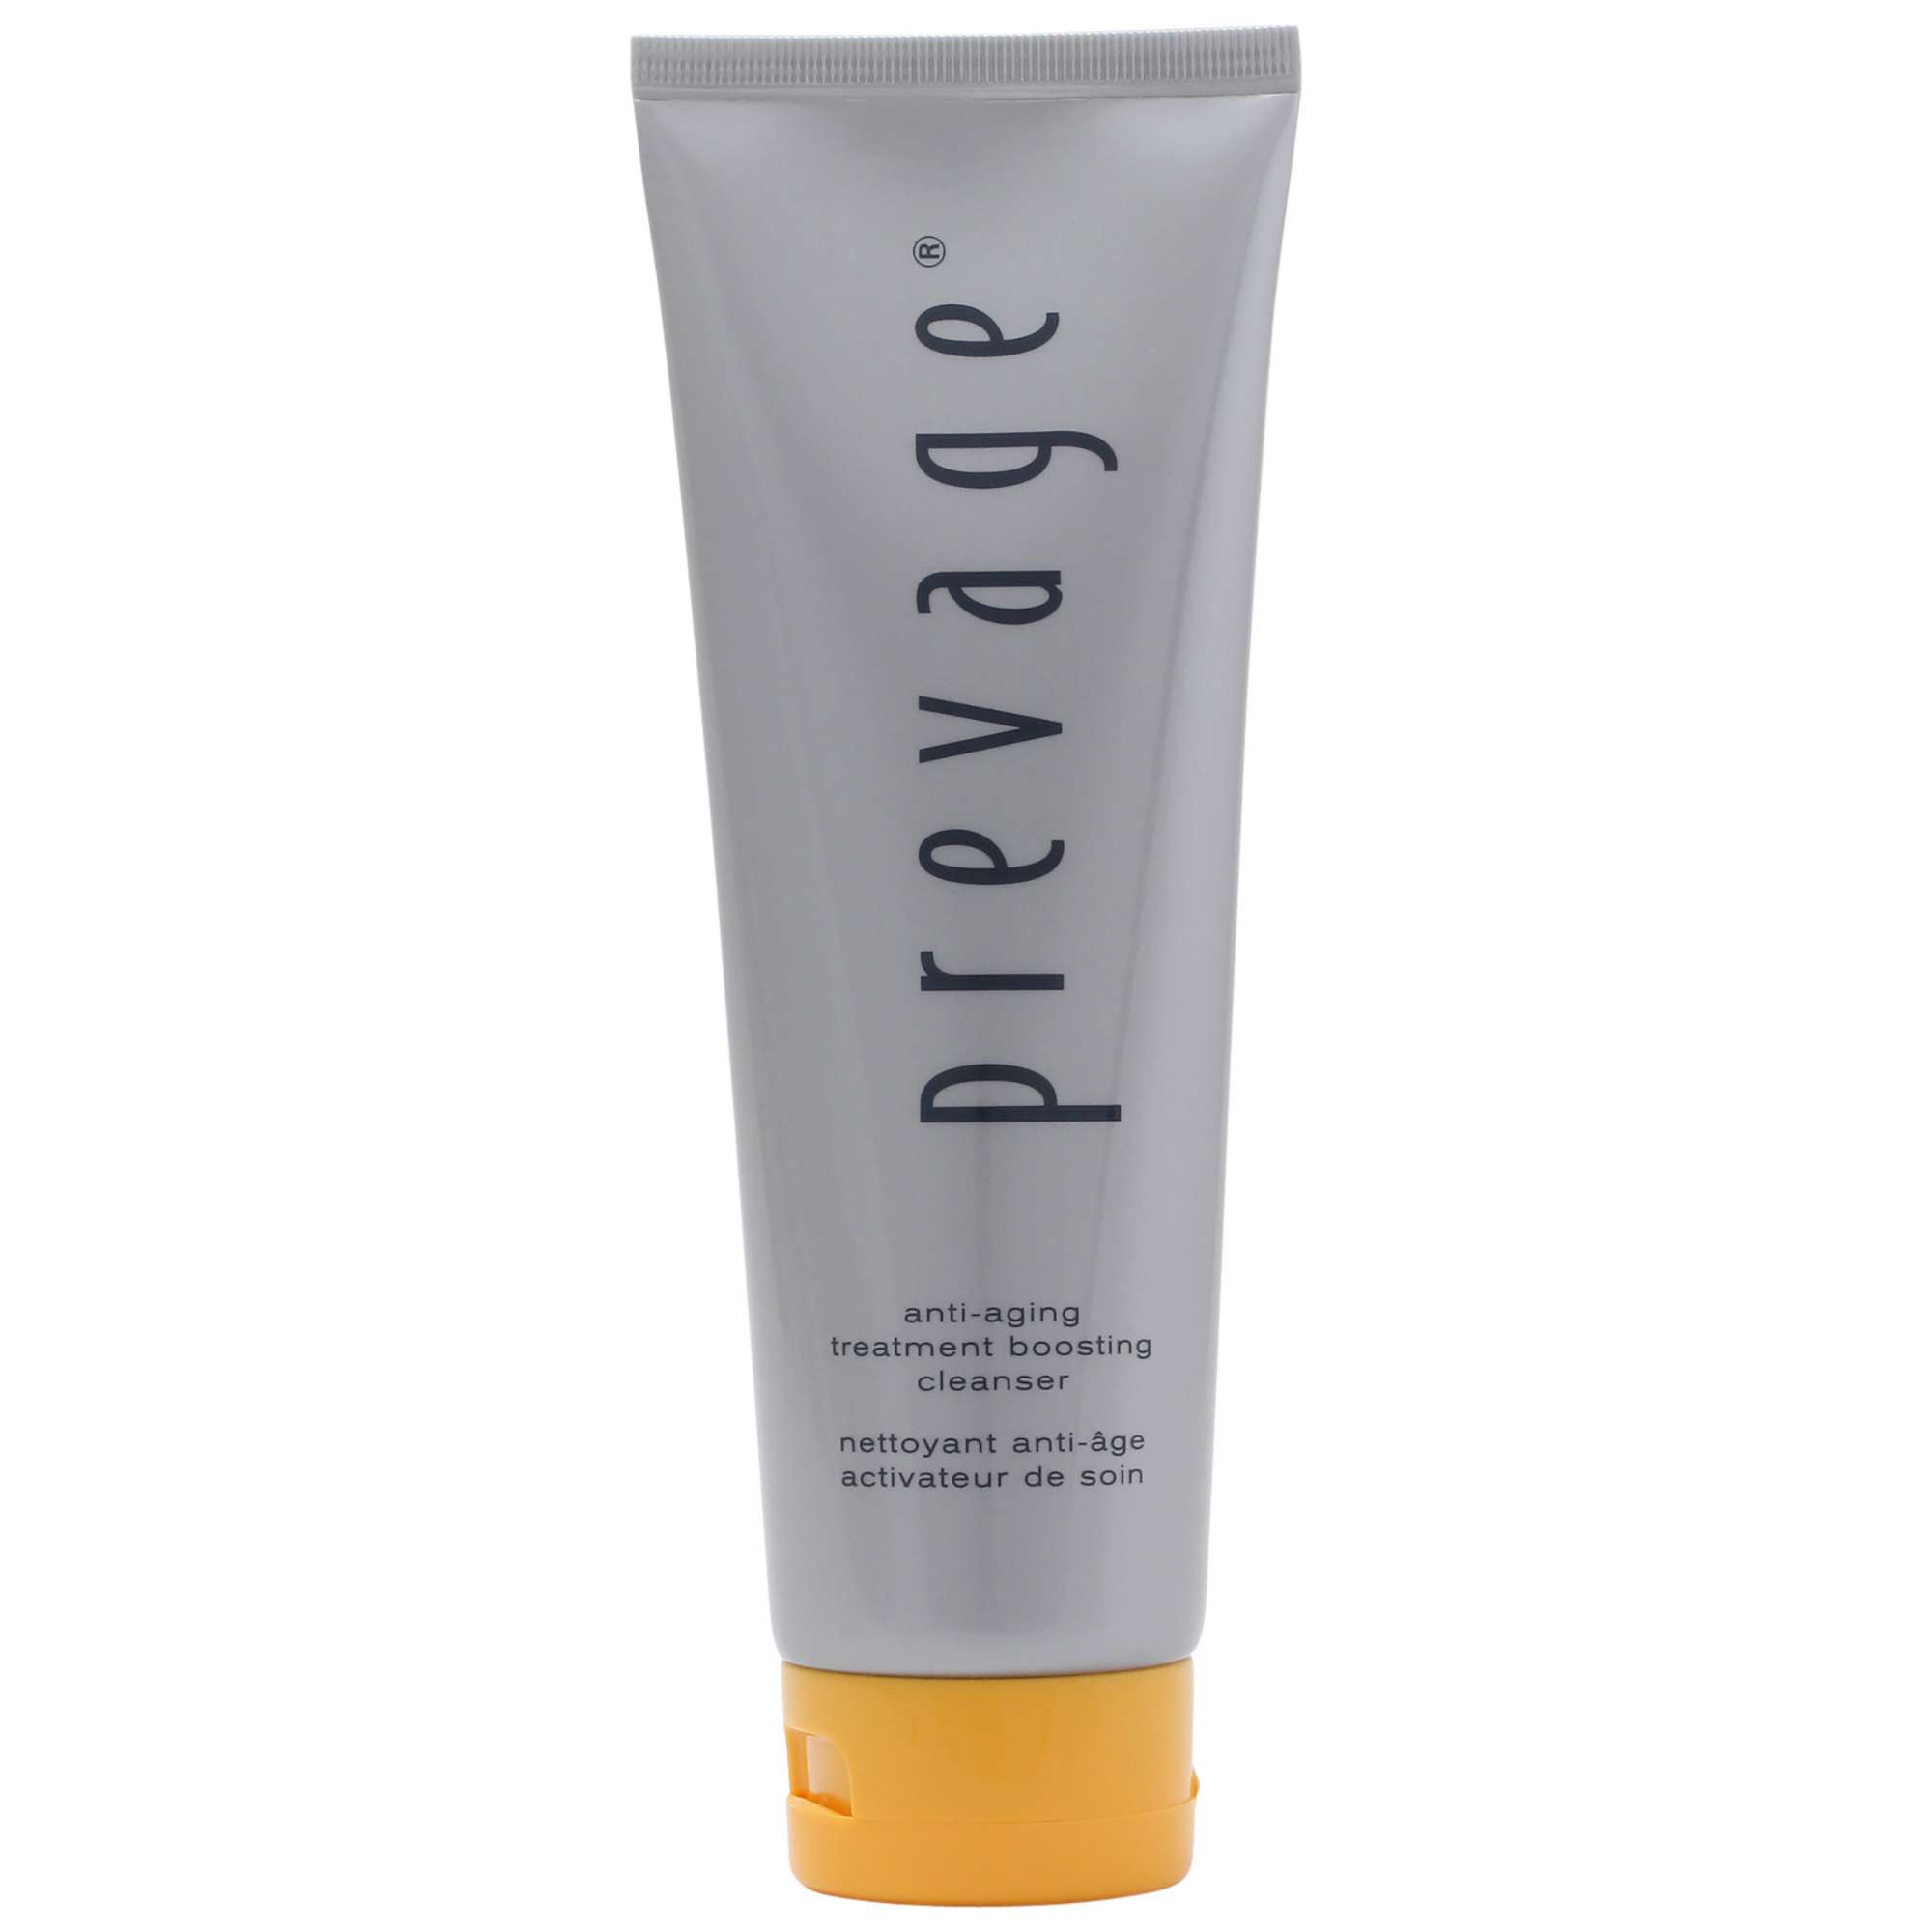 Photos - Facial / Body Cleansing Product Elizabeth Arden Prevage Anti Ageing Boosting Cleanser 125ml 